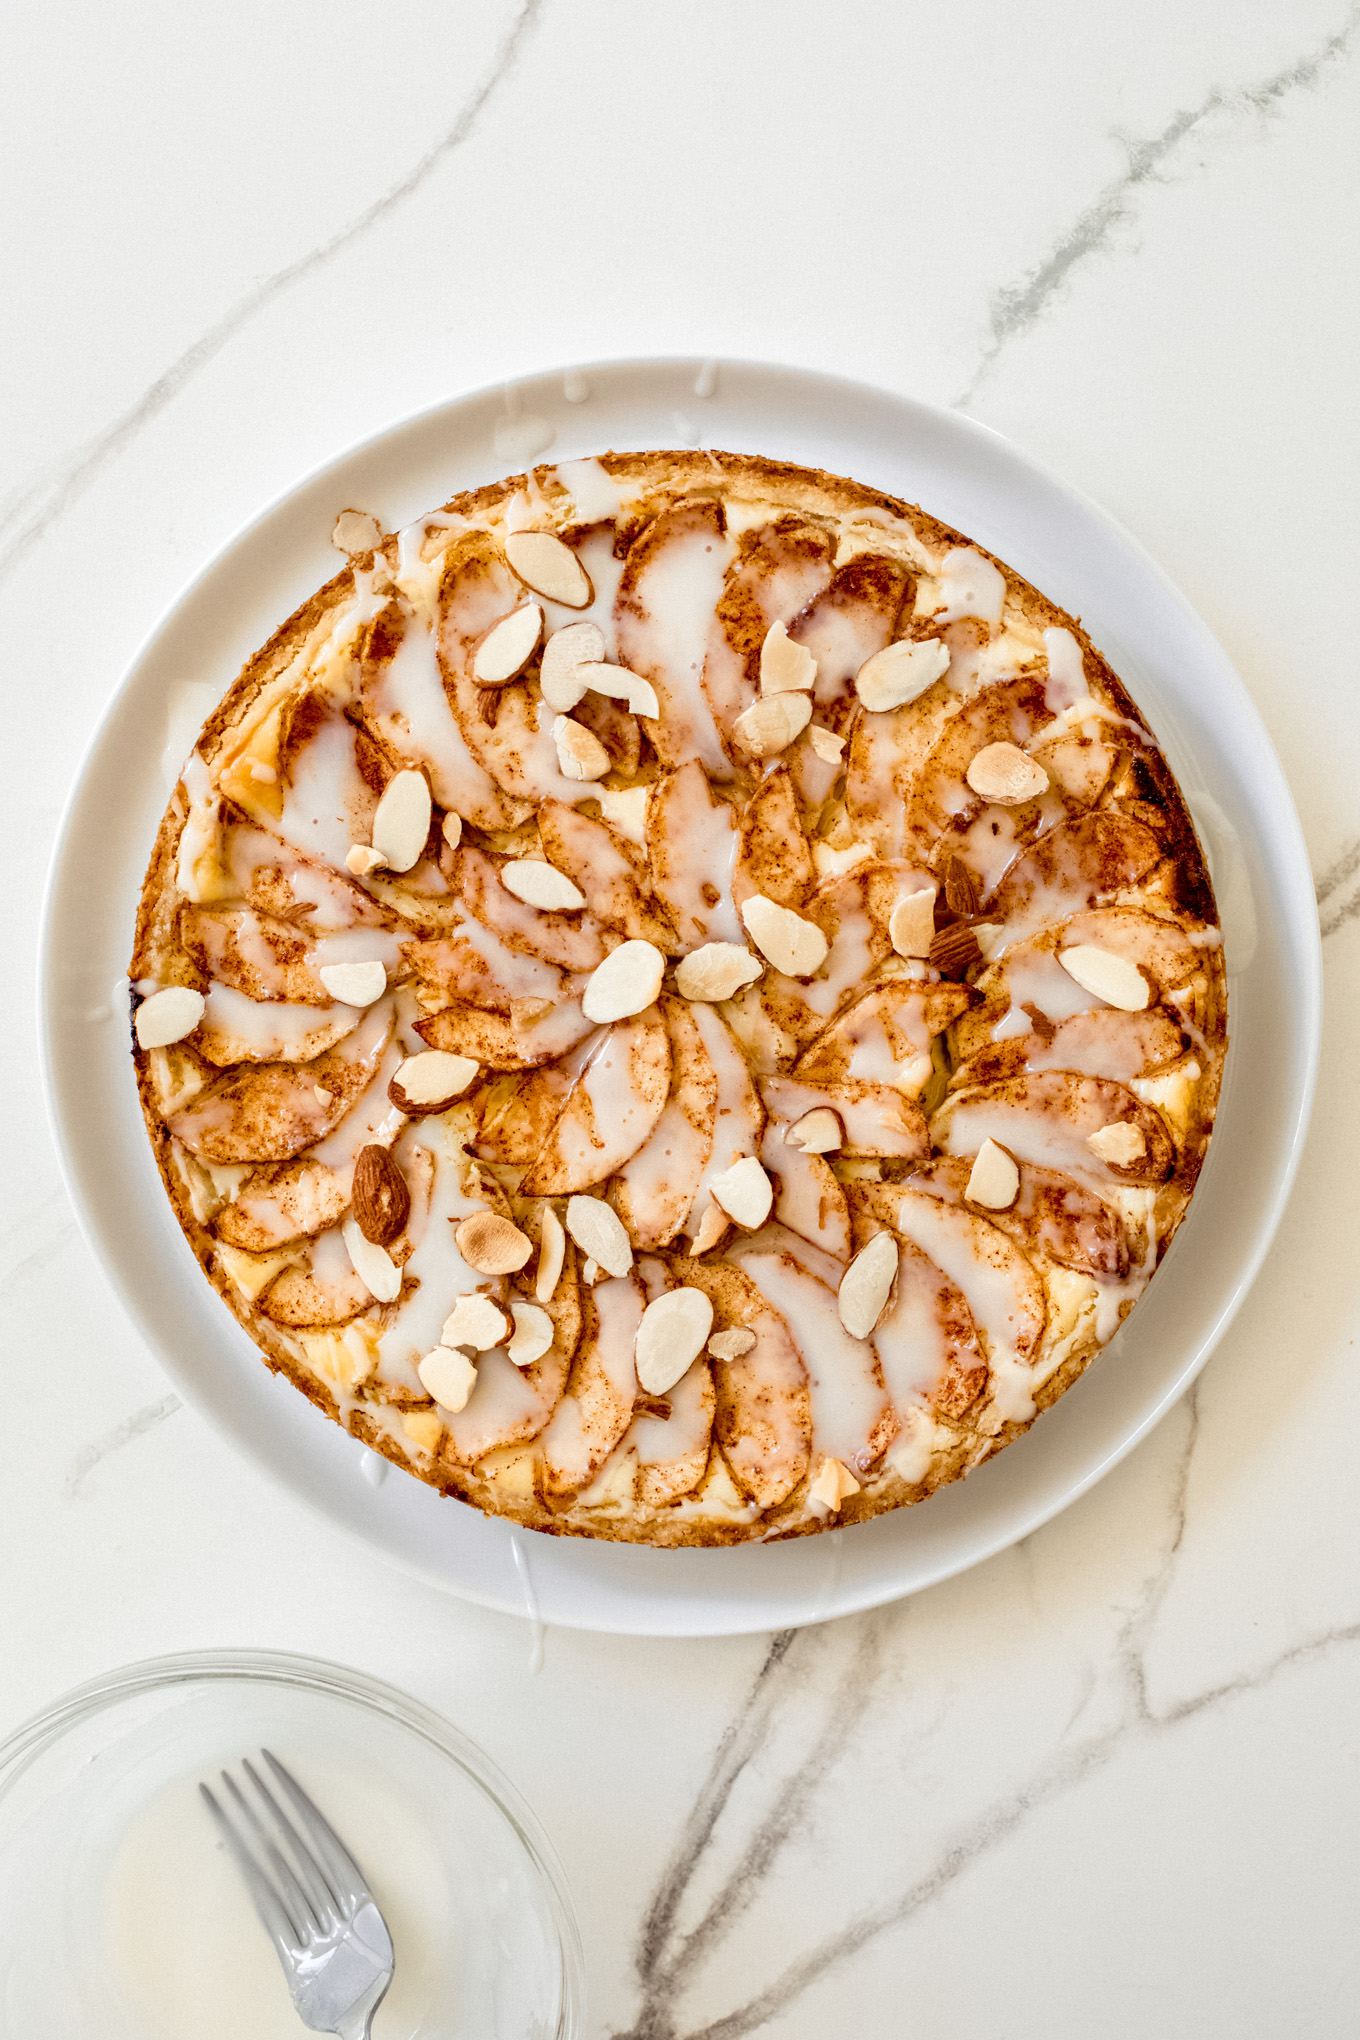 apple tart topped with glaze and sliced almonds.